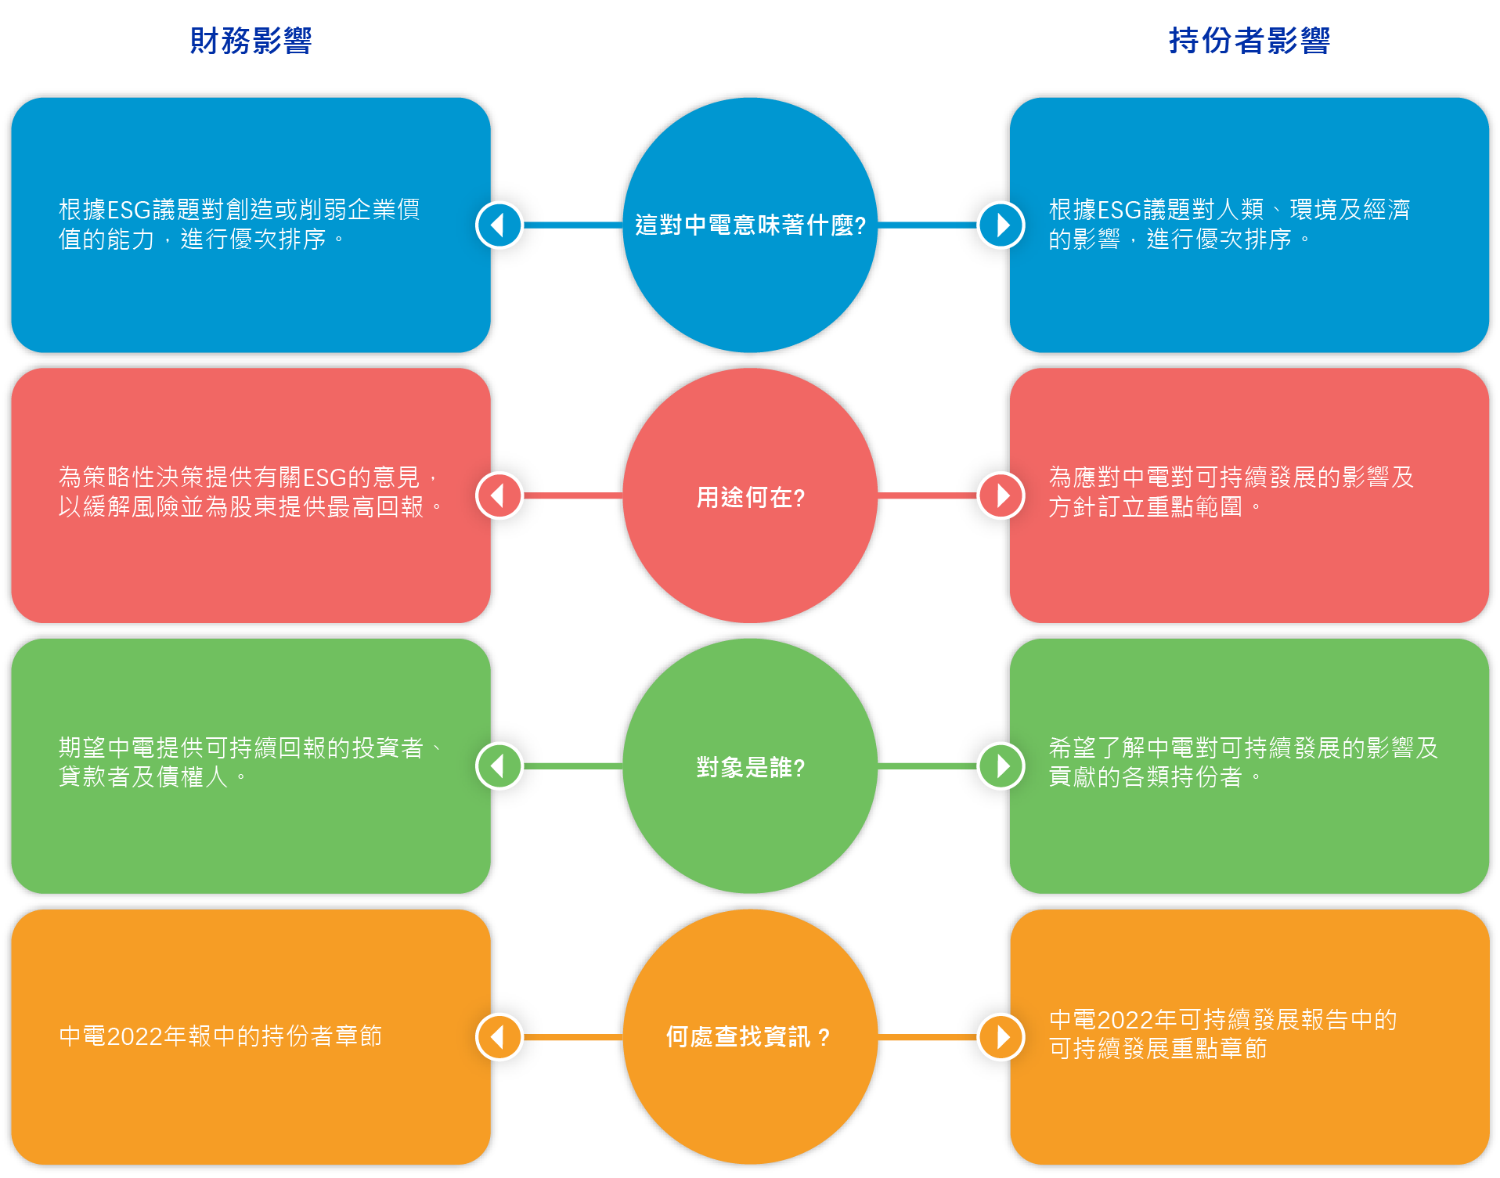 Enhancing_double_materiality_methodology (Chinese)